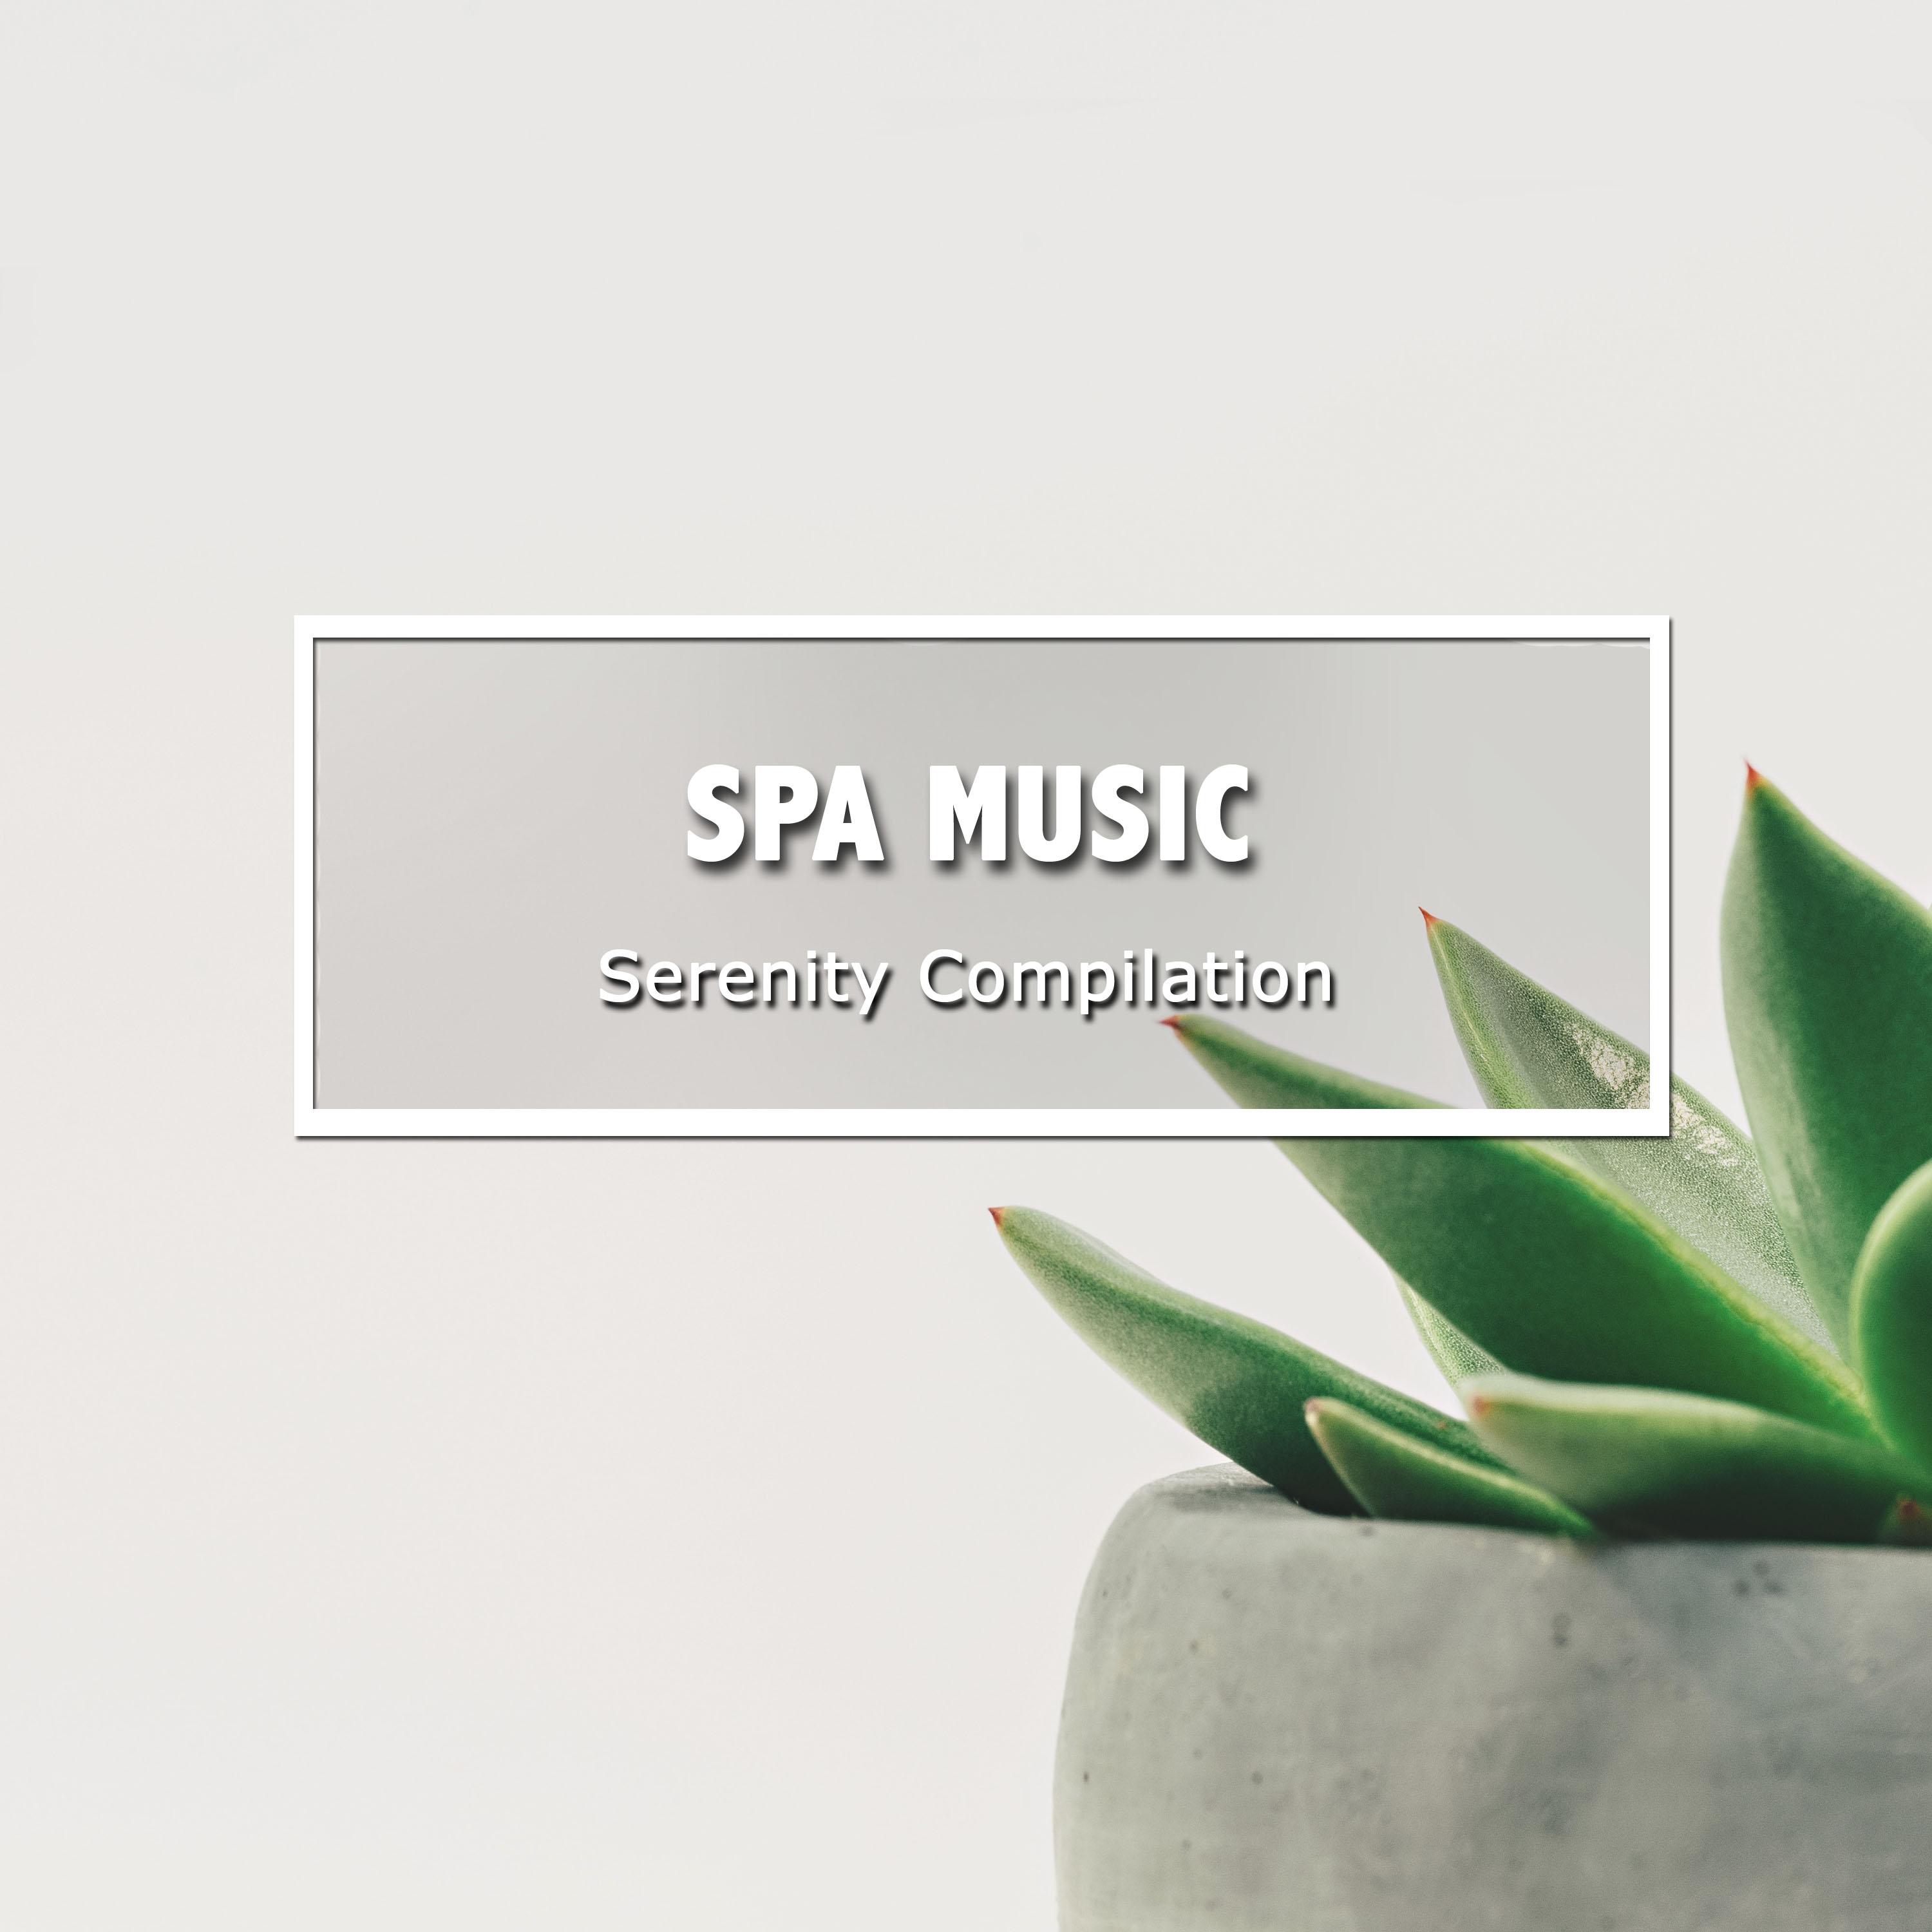 17 Spa Music Sounds: Serenity Compilation